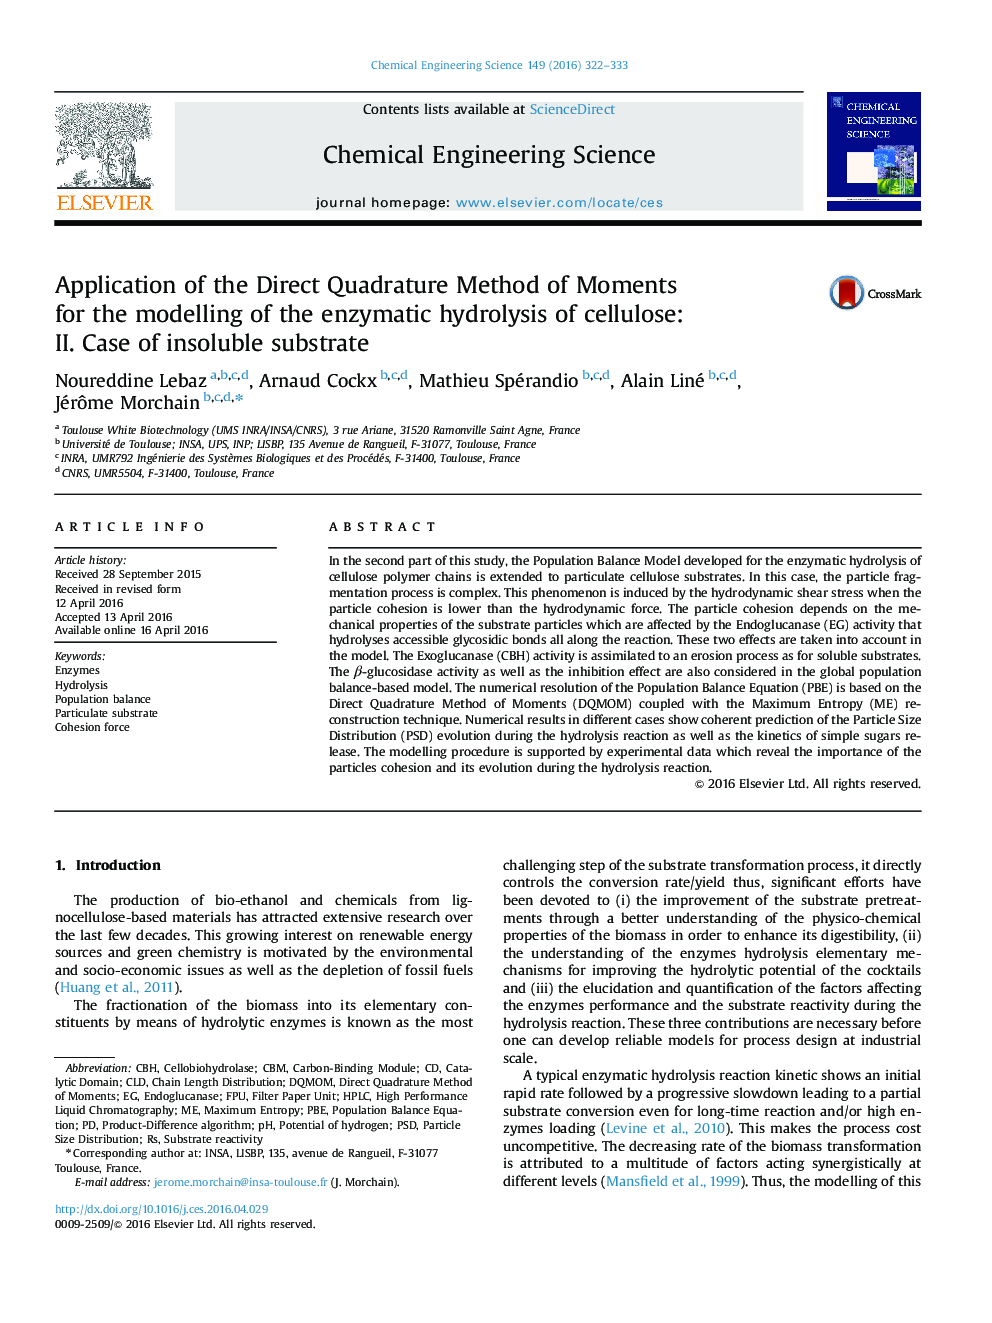 Application of the Direct Quadrature Method of Moments for the modelling of the enzymatic hydrolysis of cellulose: II. Case of insoluble substrate